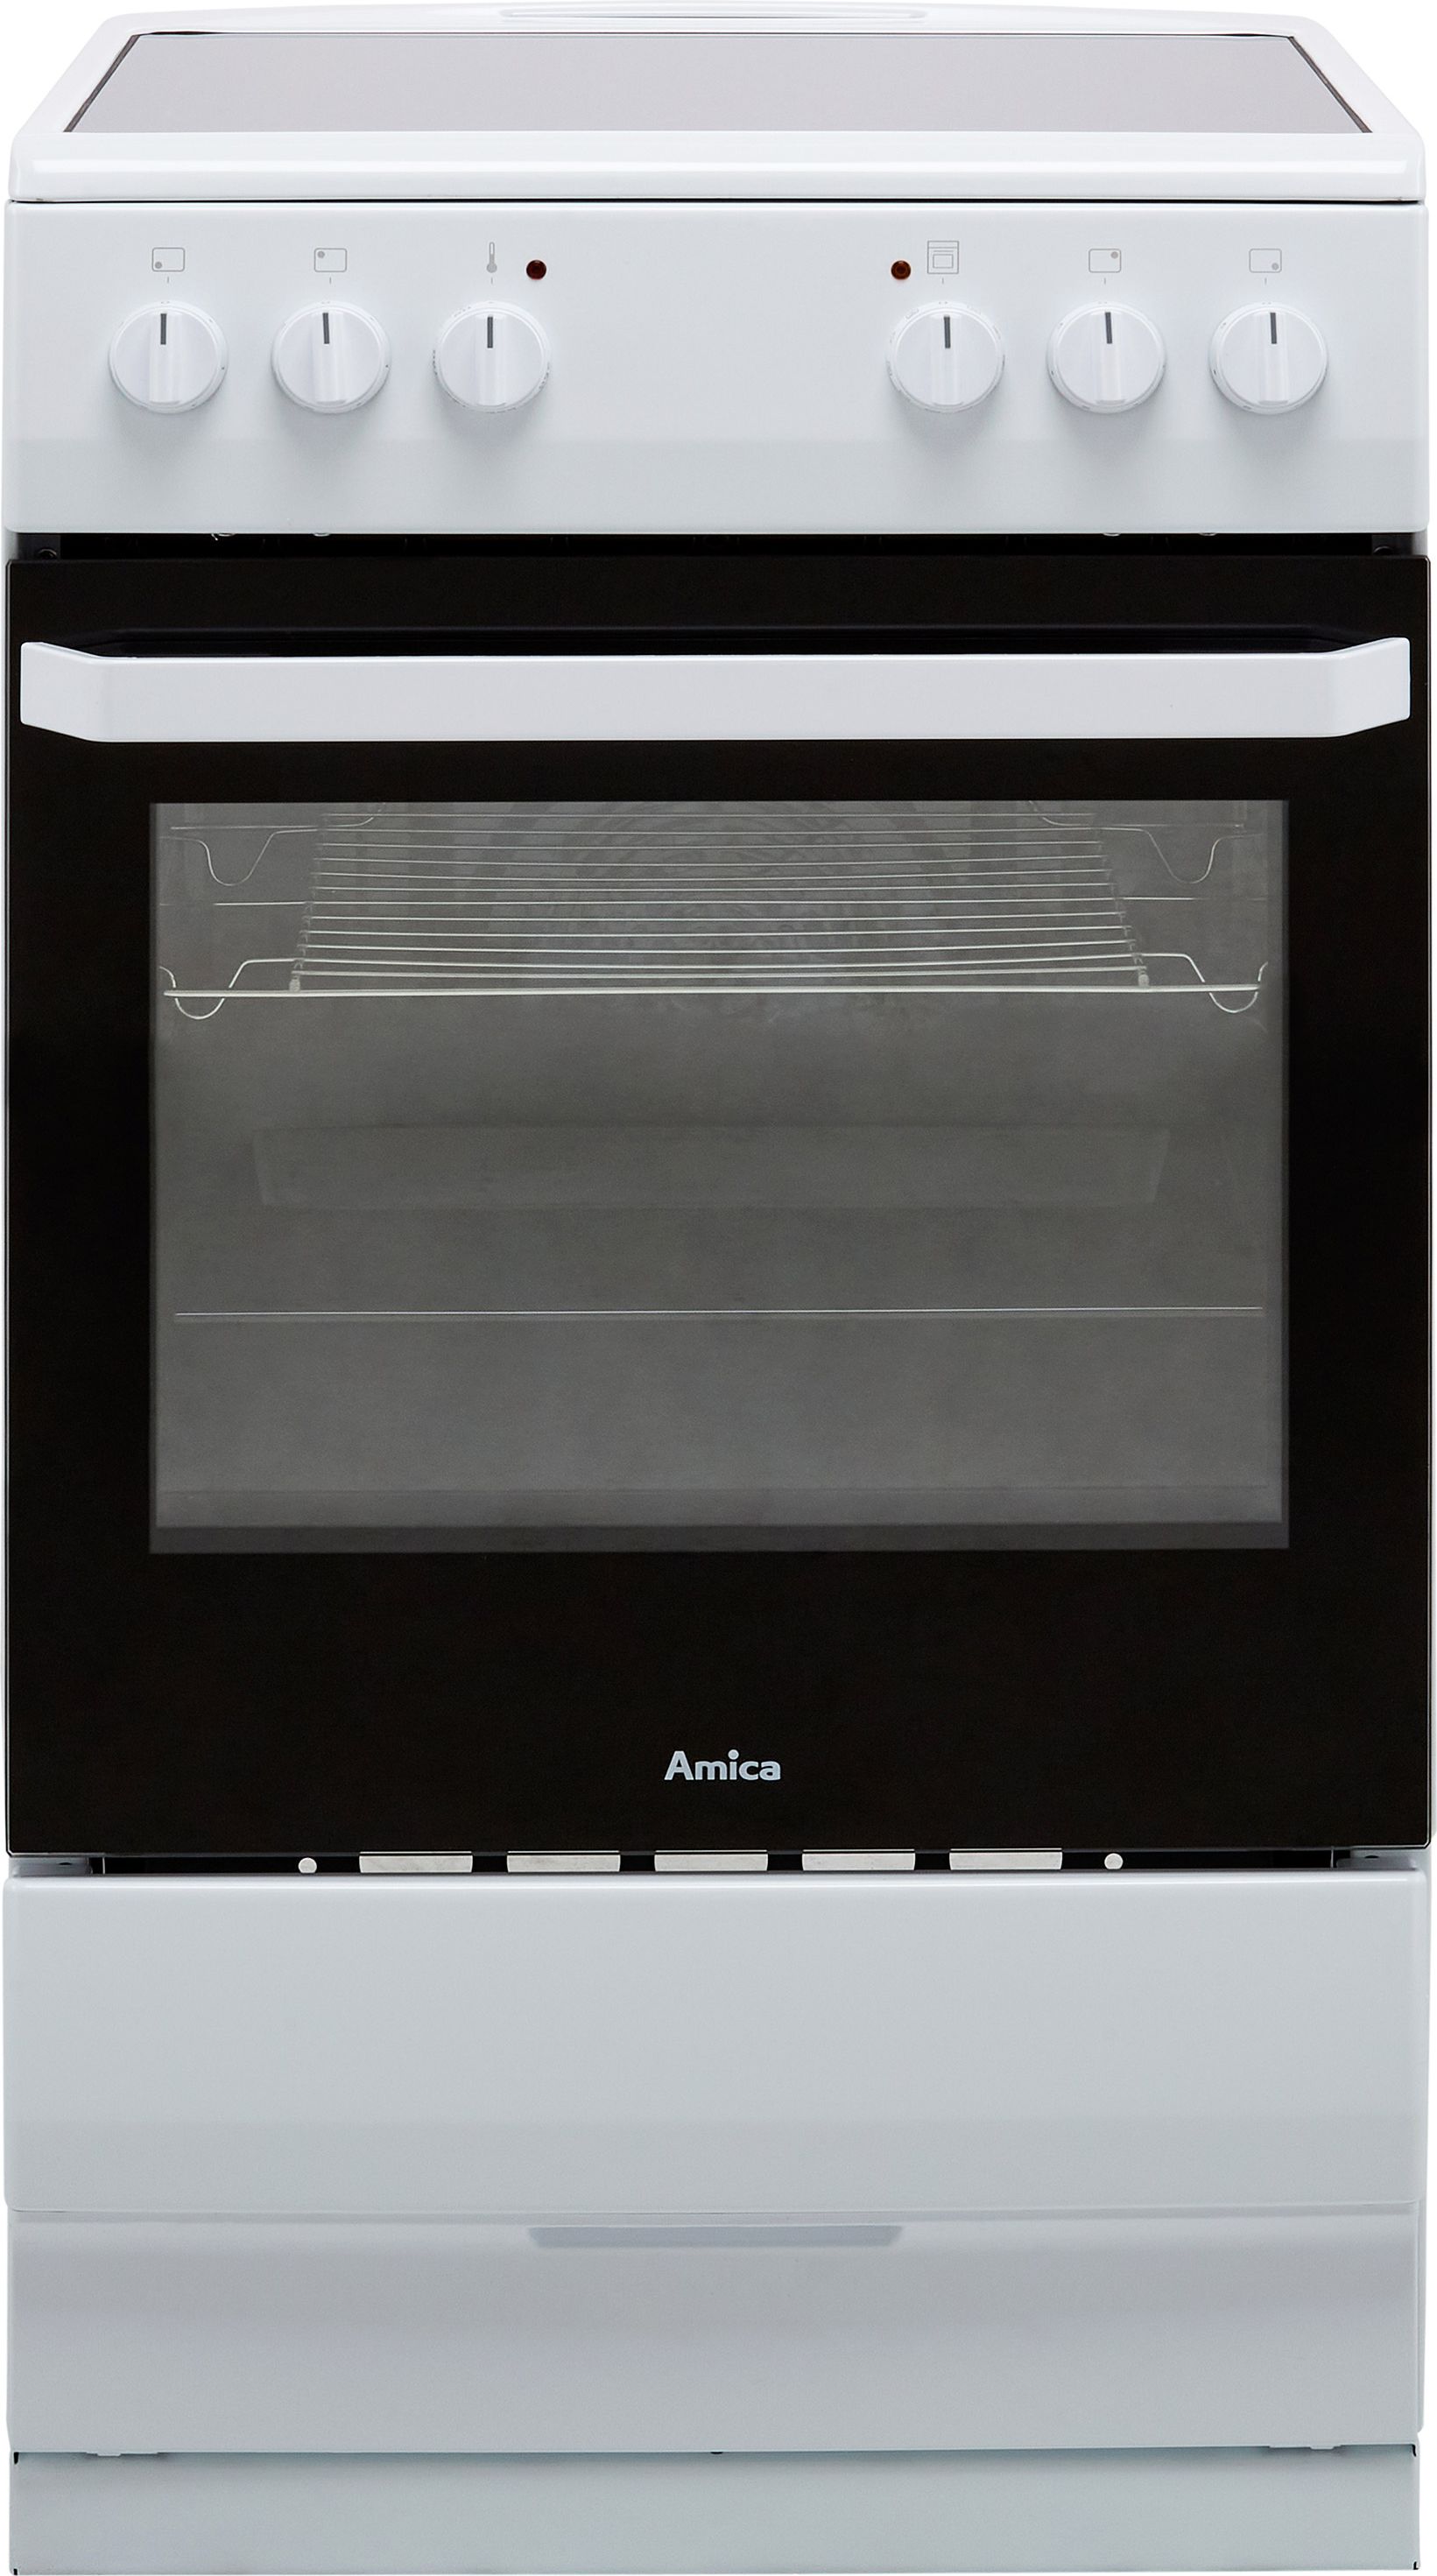 Amica AFC1530WH 50cm Electric Cooker with Ceramic Hob - White - A Rated, White